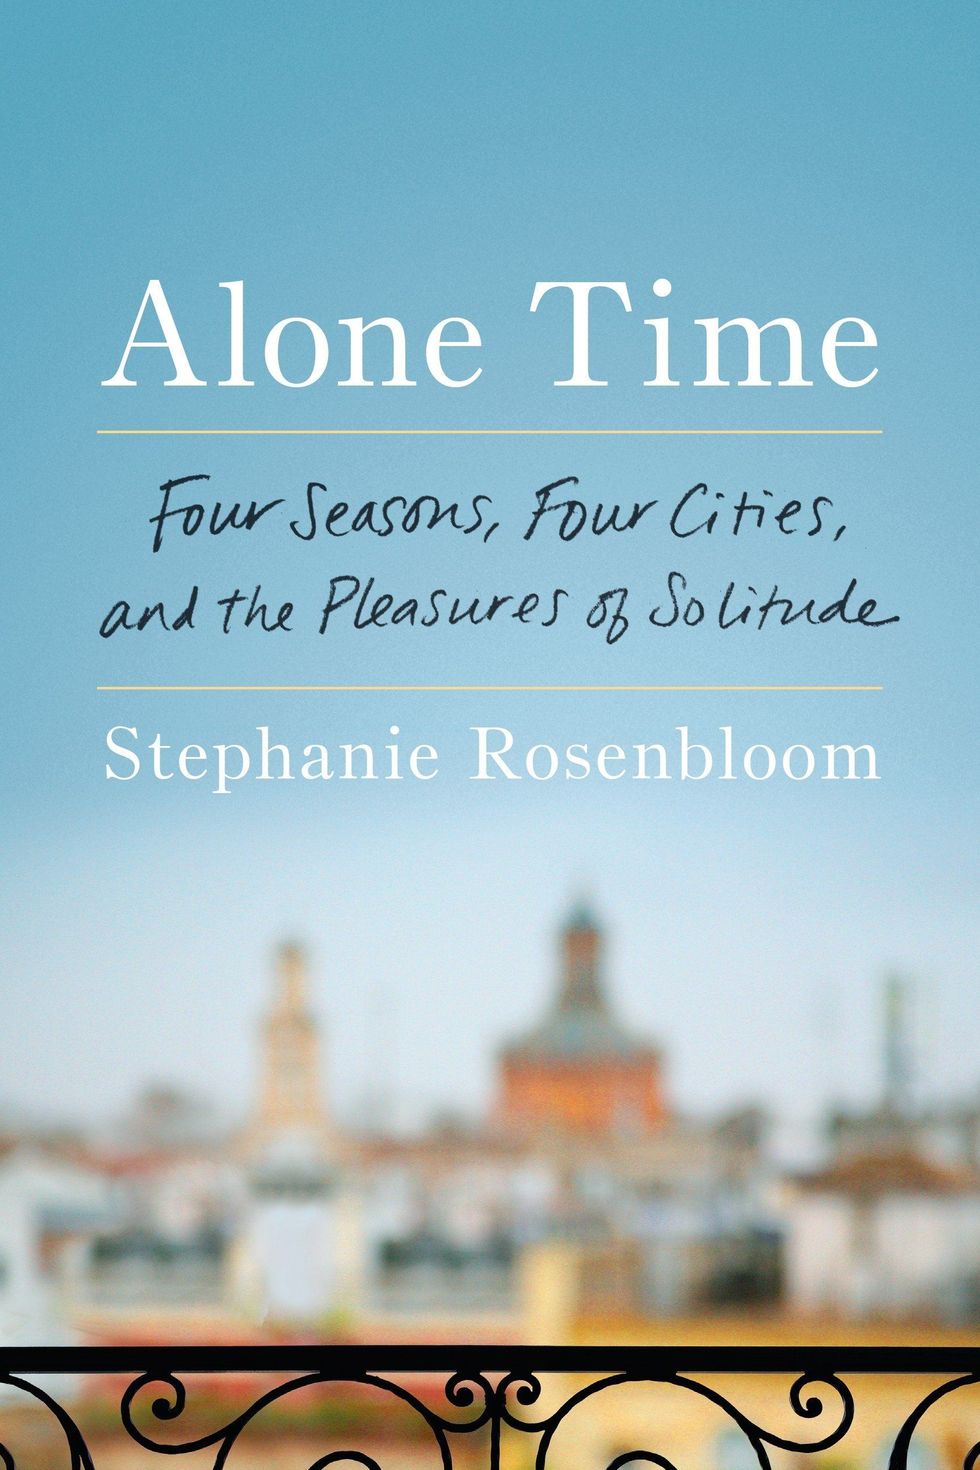 <i>Alone Time: Four Seasons, Four Cities, and the Pleasures of Solitude</i> by Stephanie Rosenbloom